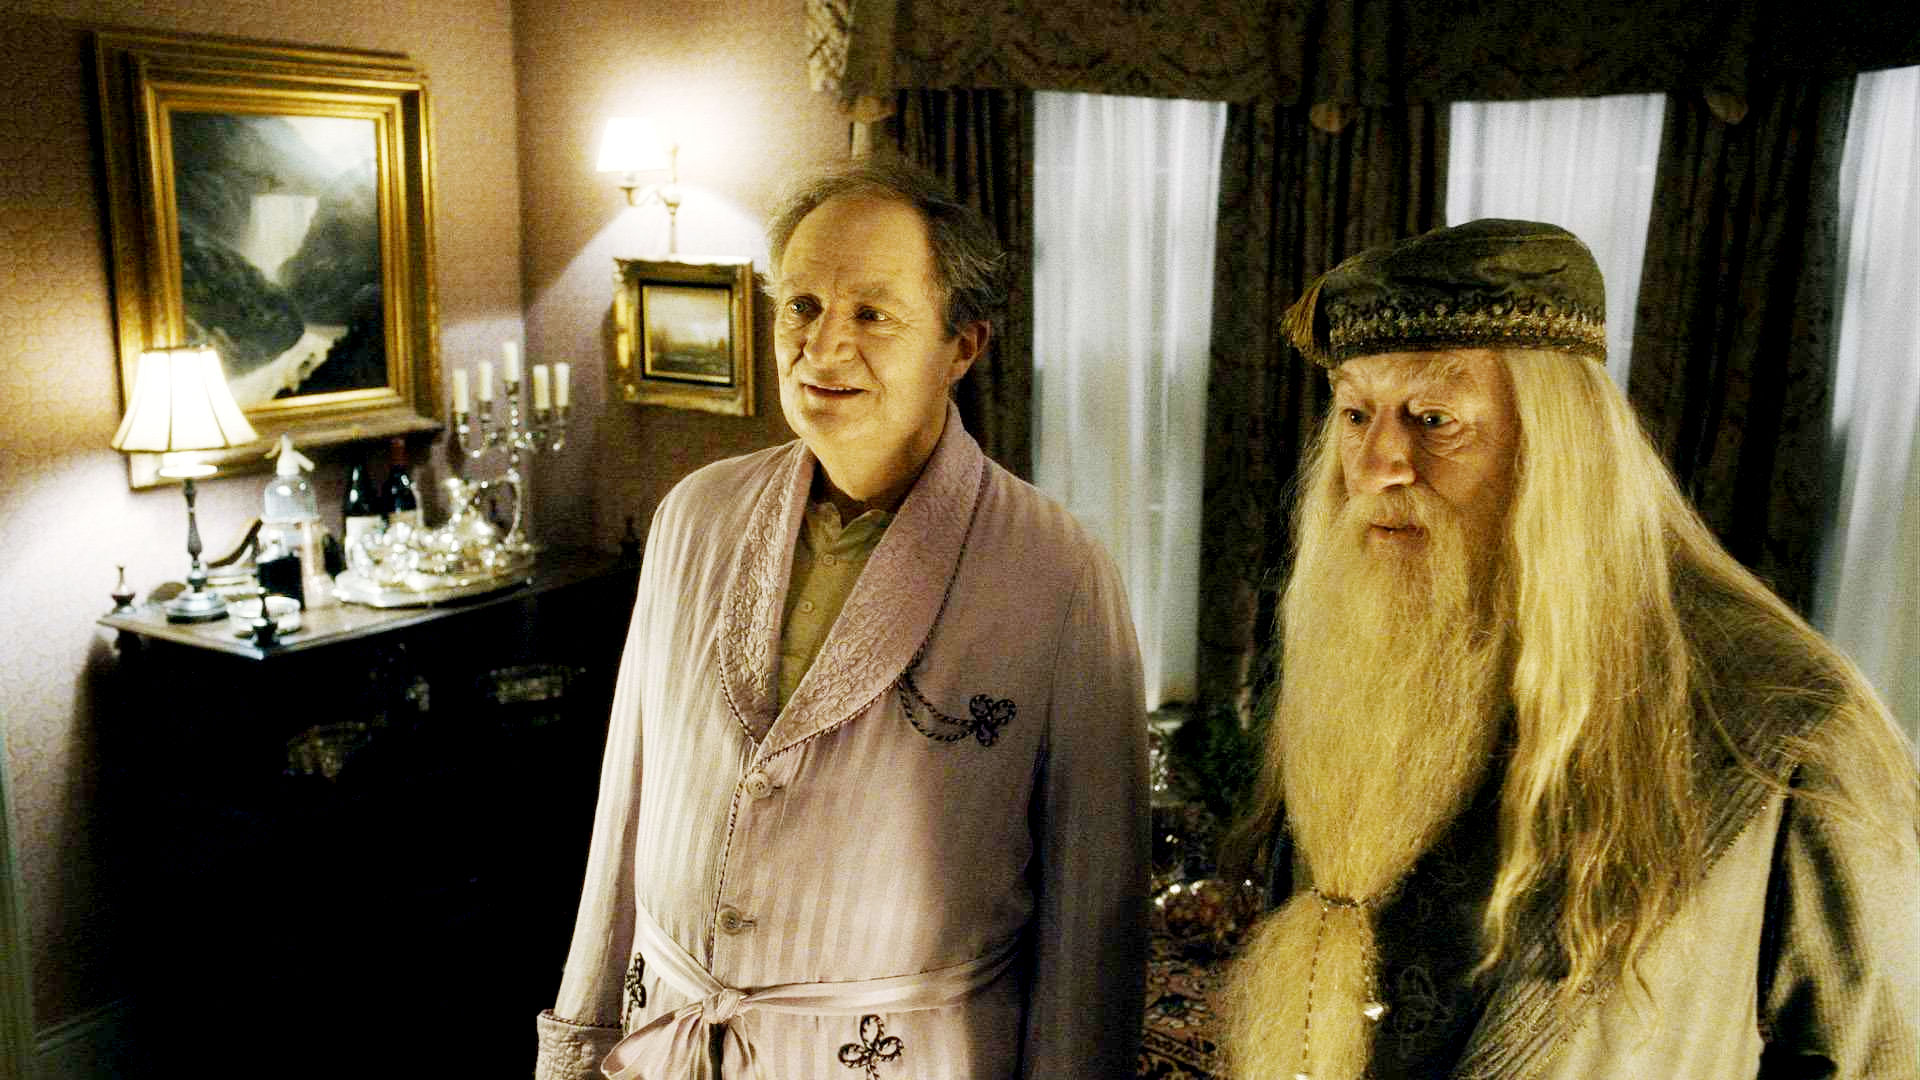 Jim Broadbent stars as Horace Slughorn and Michael Gambon stars as Albus Dumbledore in Warner Bros Pictures' Harry Potter and the Half-Blood Prince (2009)